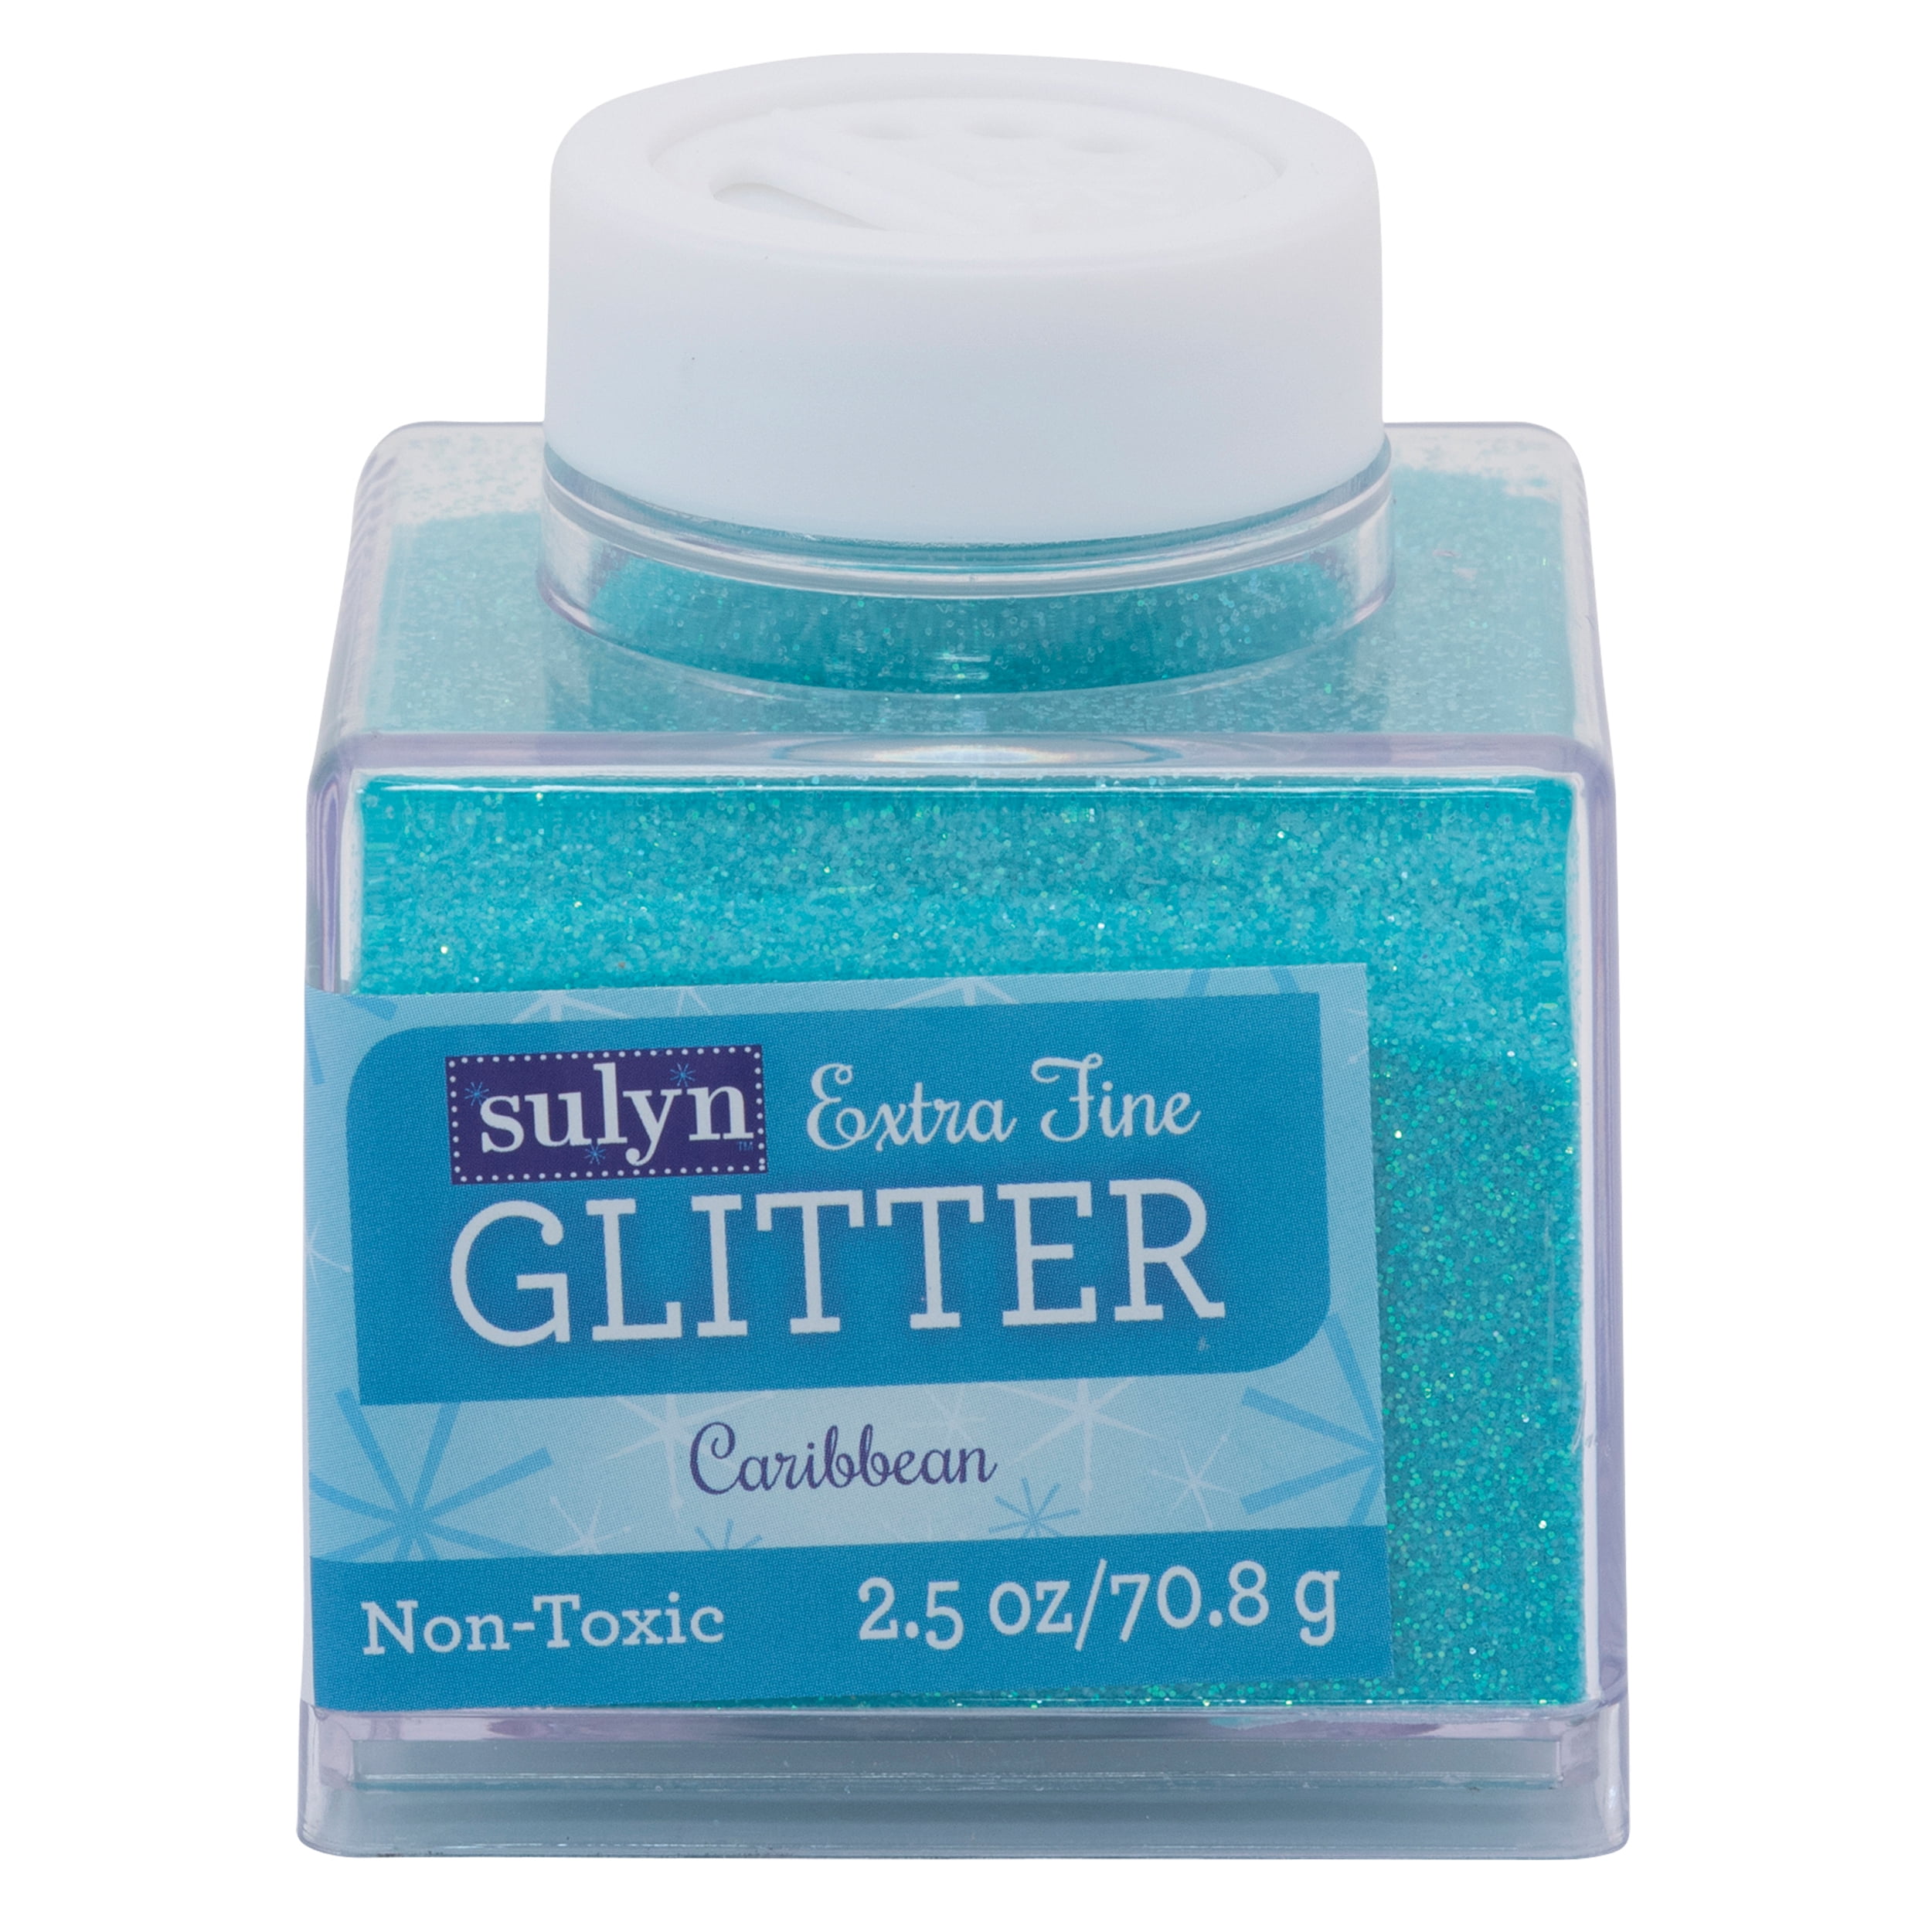 Sulyn Extra Fine Glitter for Crafts, Caribbean Blue, 2.5 oz